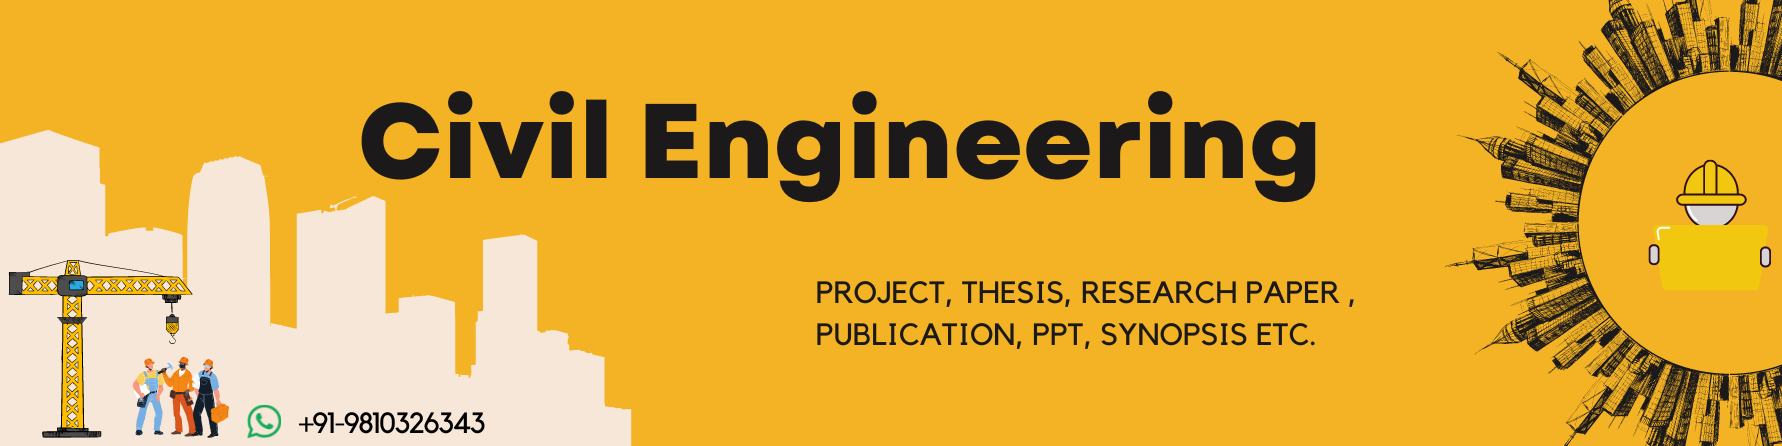 mtech thesis structural engineering